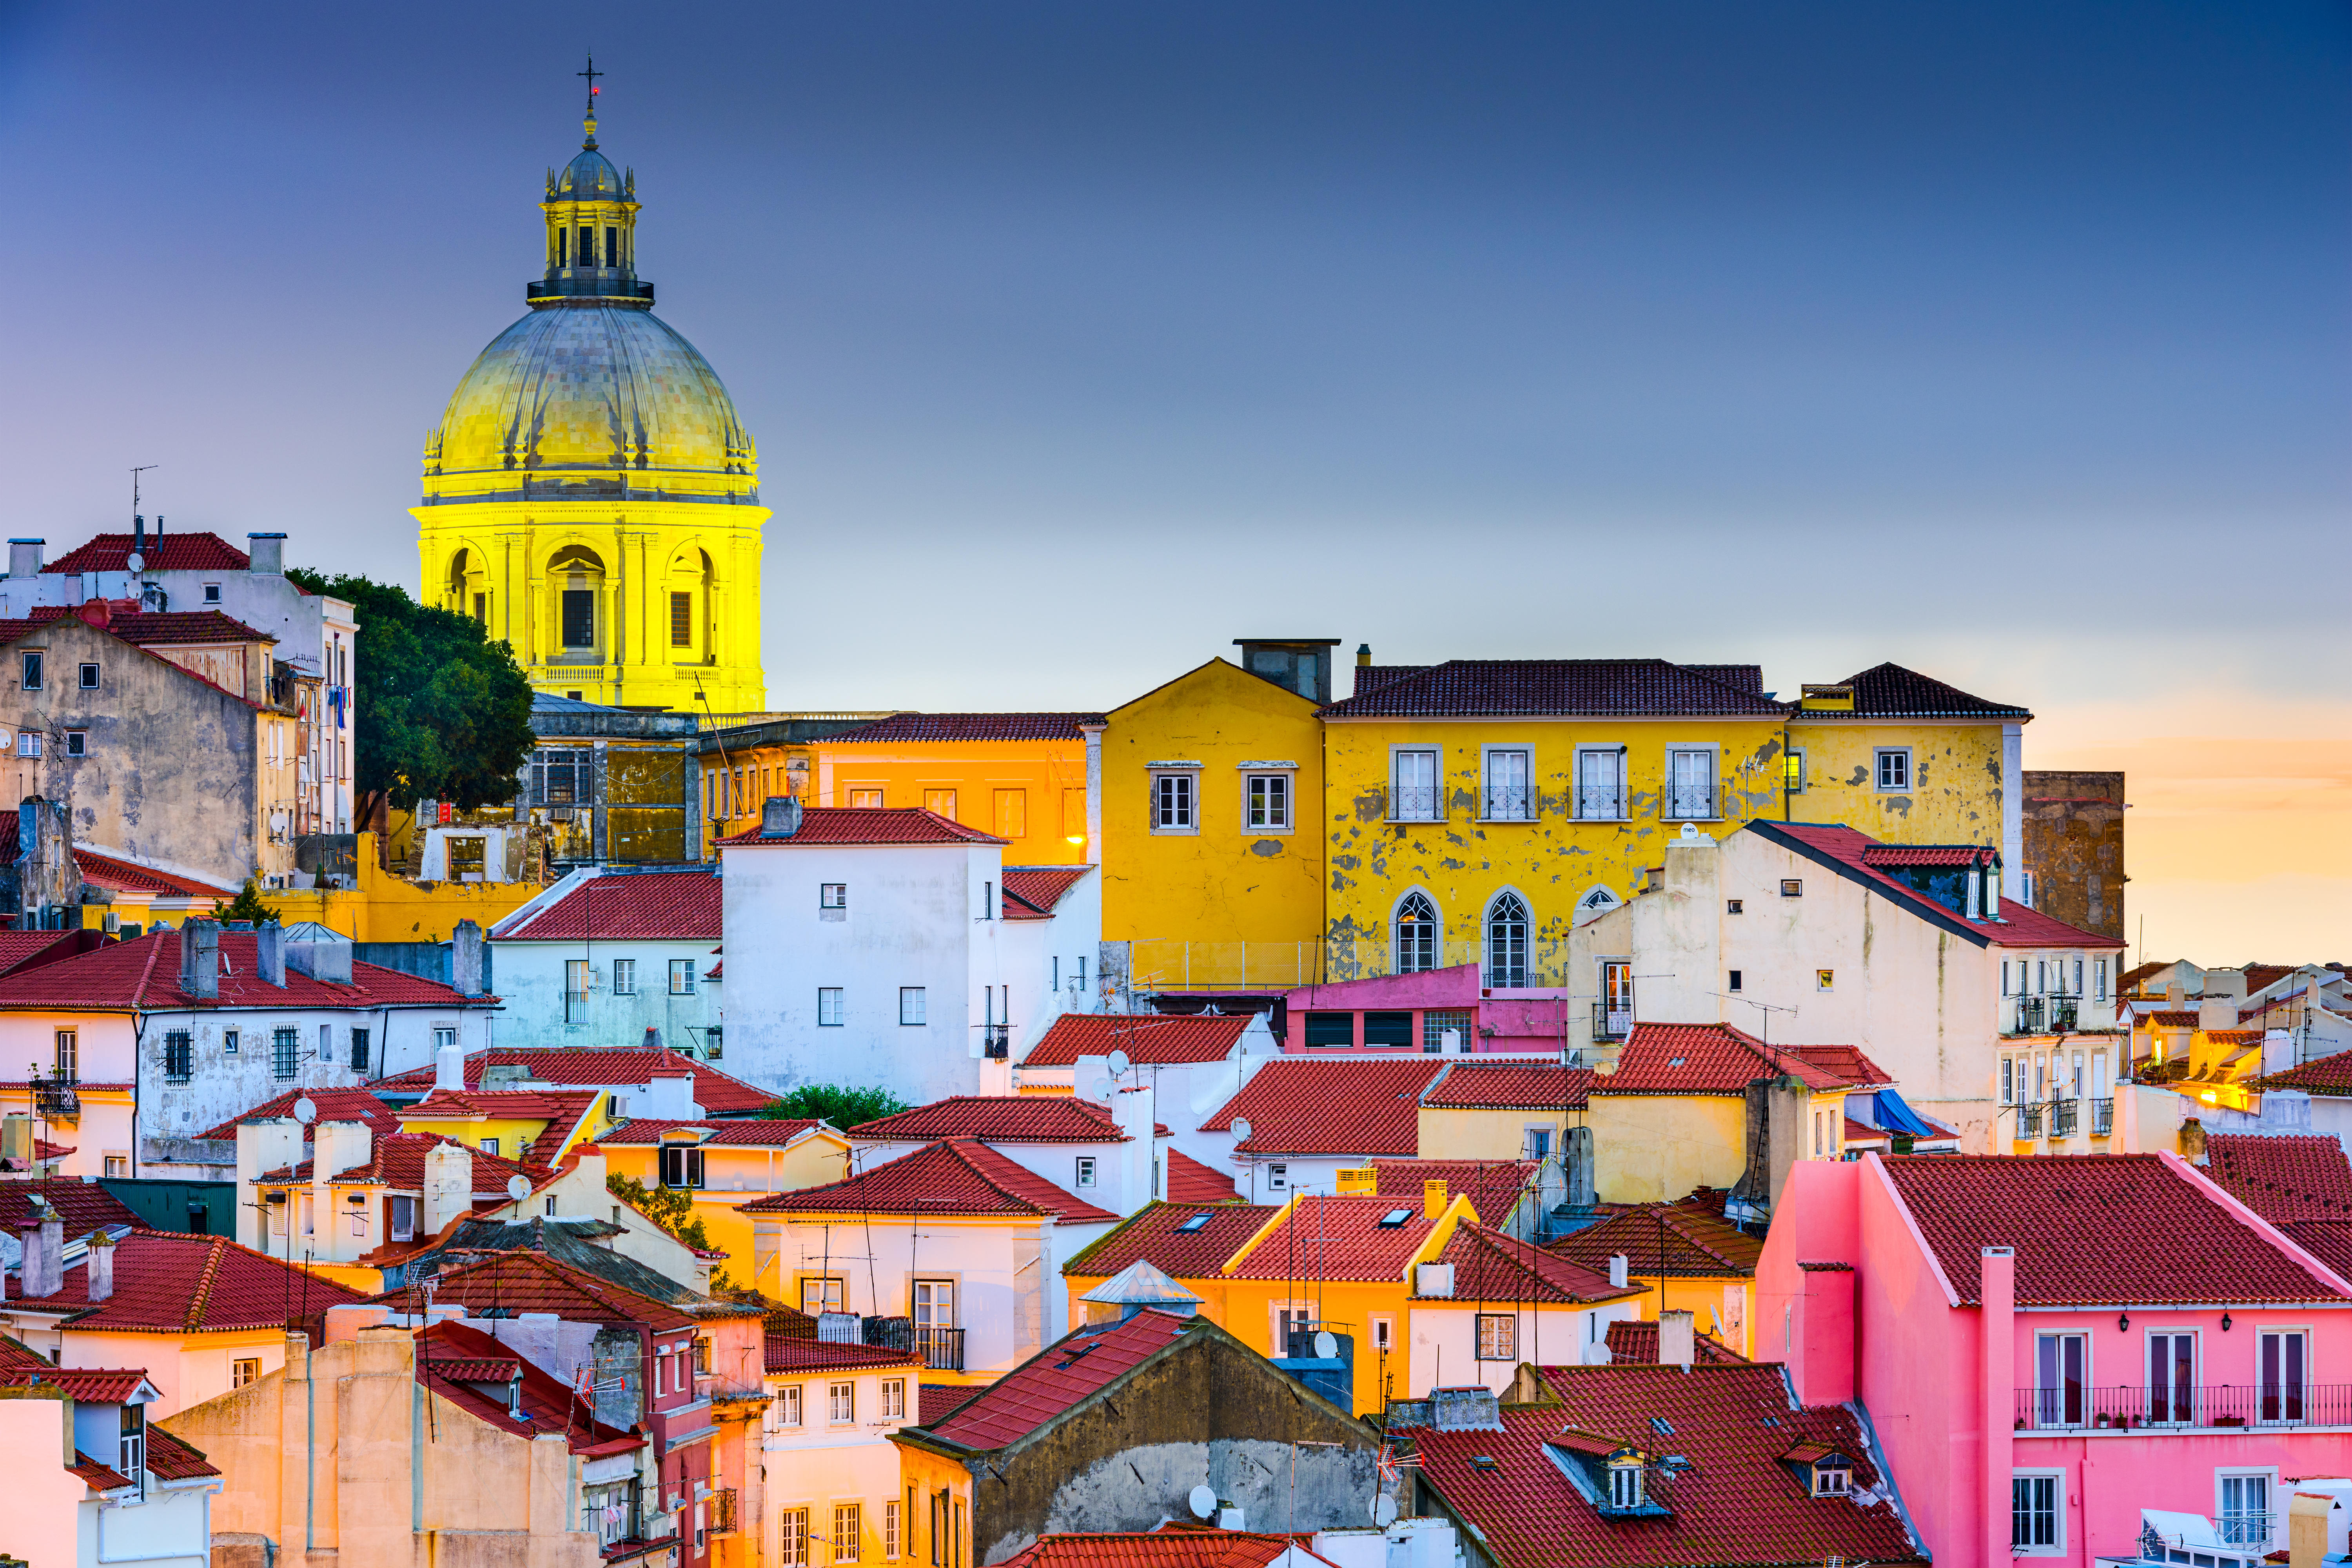 Lisbon's colourful skyline is waiting for you